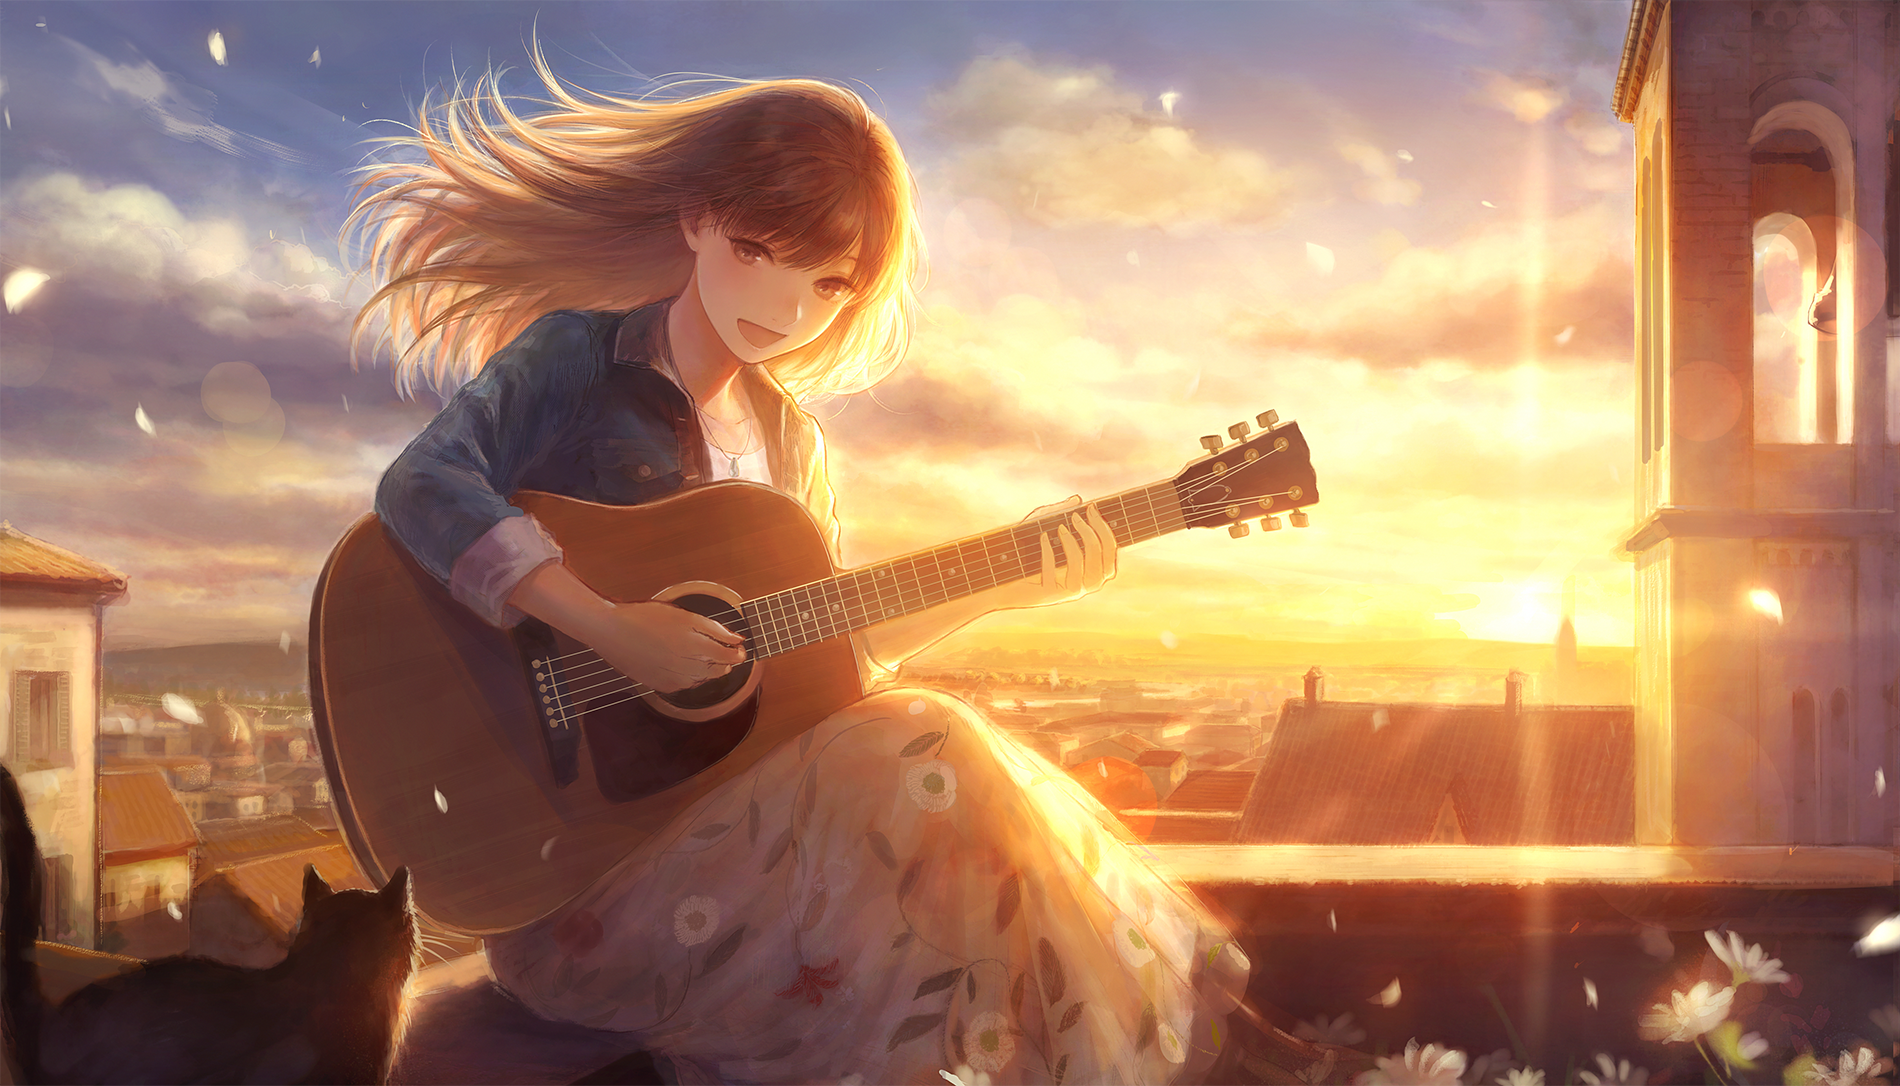 190+ Anime Music HD Wallpapers and Backgrounds